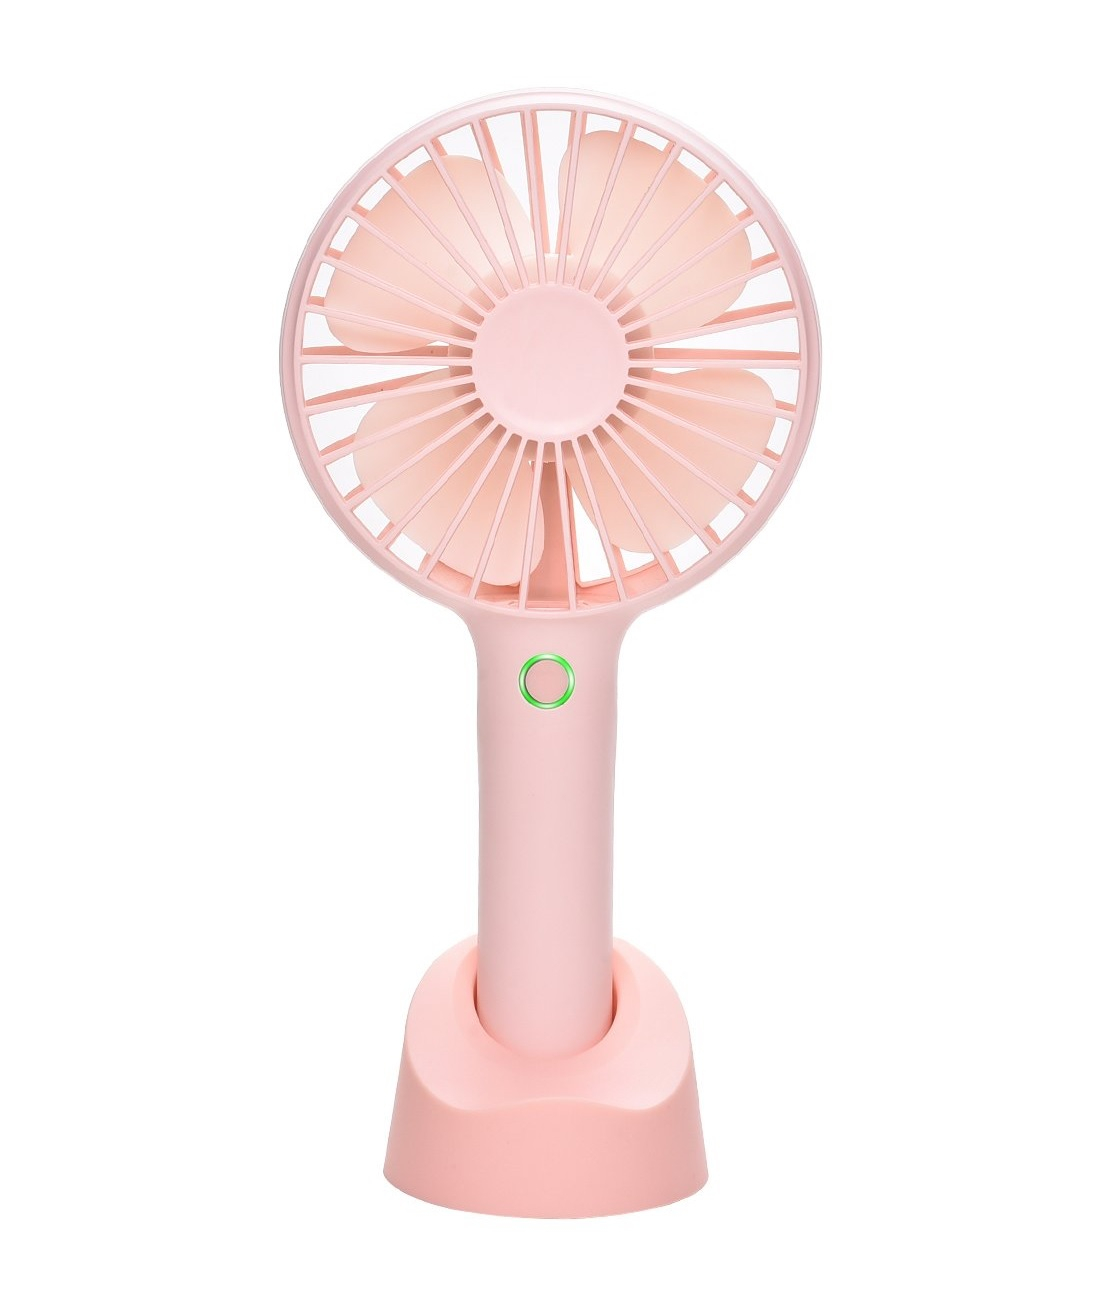 Handheld Portable Fanusb Hand Held Rechargeable Battery Powered Fan With Base 2500mah Battery 4 Modes For Home Office Bedroom And Outdoor Pink throughout sizing 1096 X 1308